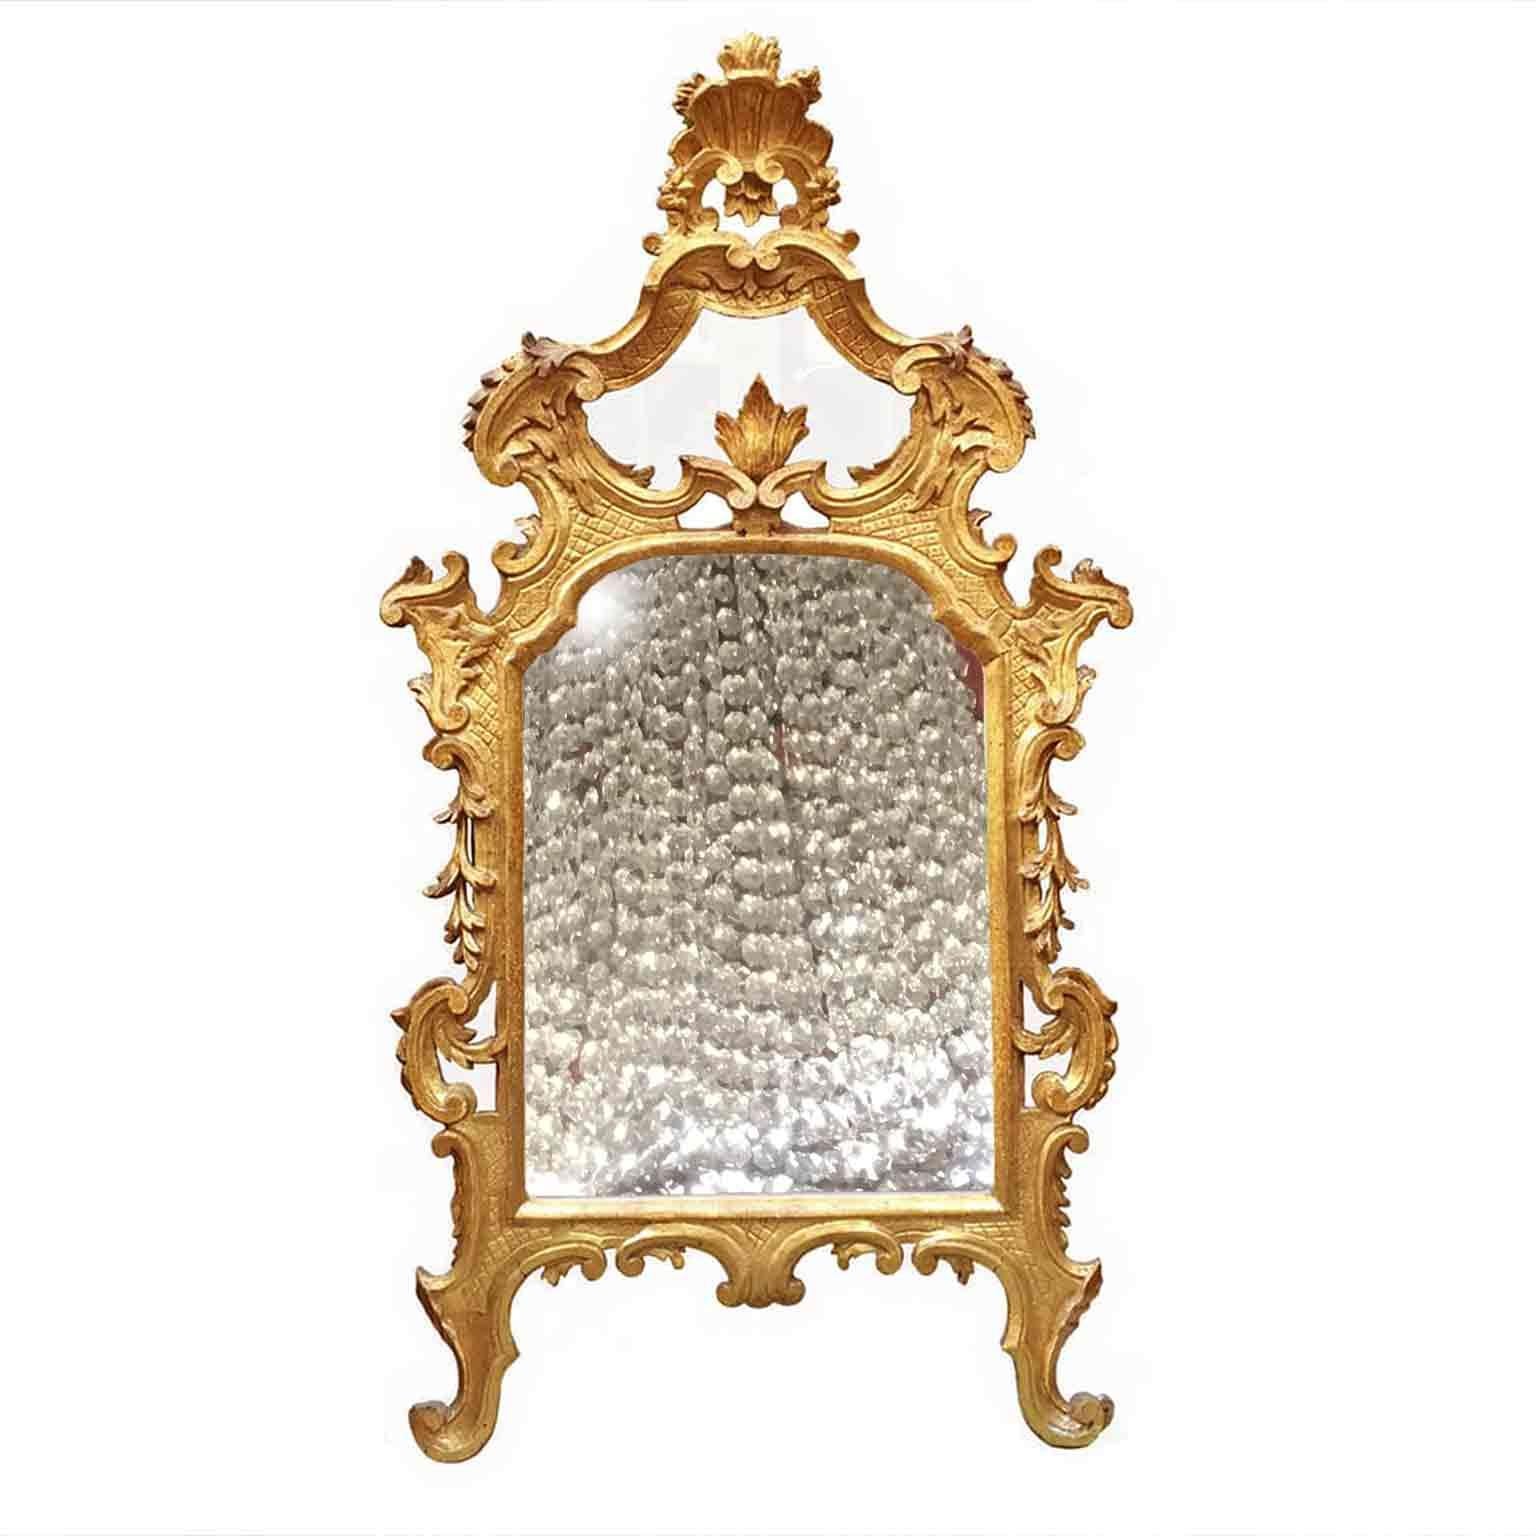 An Italian Louis XV carved and gilt wood mirror dating back to the third quarter of 18th century. Of Tuscan origin, this antique mirror it is realized in Cembran pinewood and comes from the furnishing of a villa in Lucca and it is in overall good